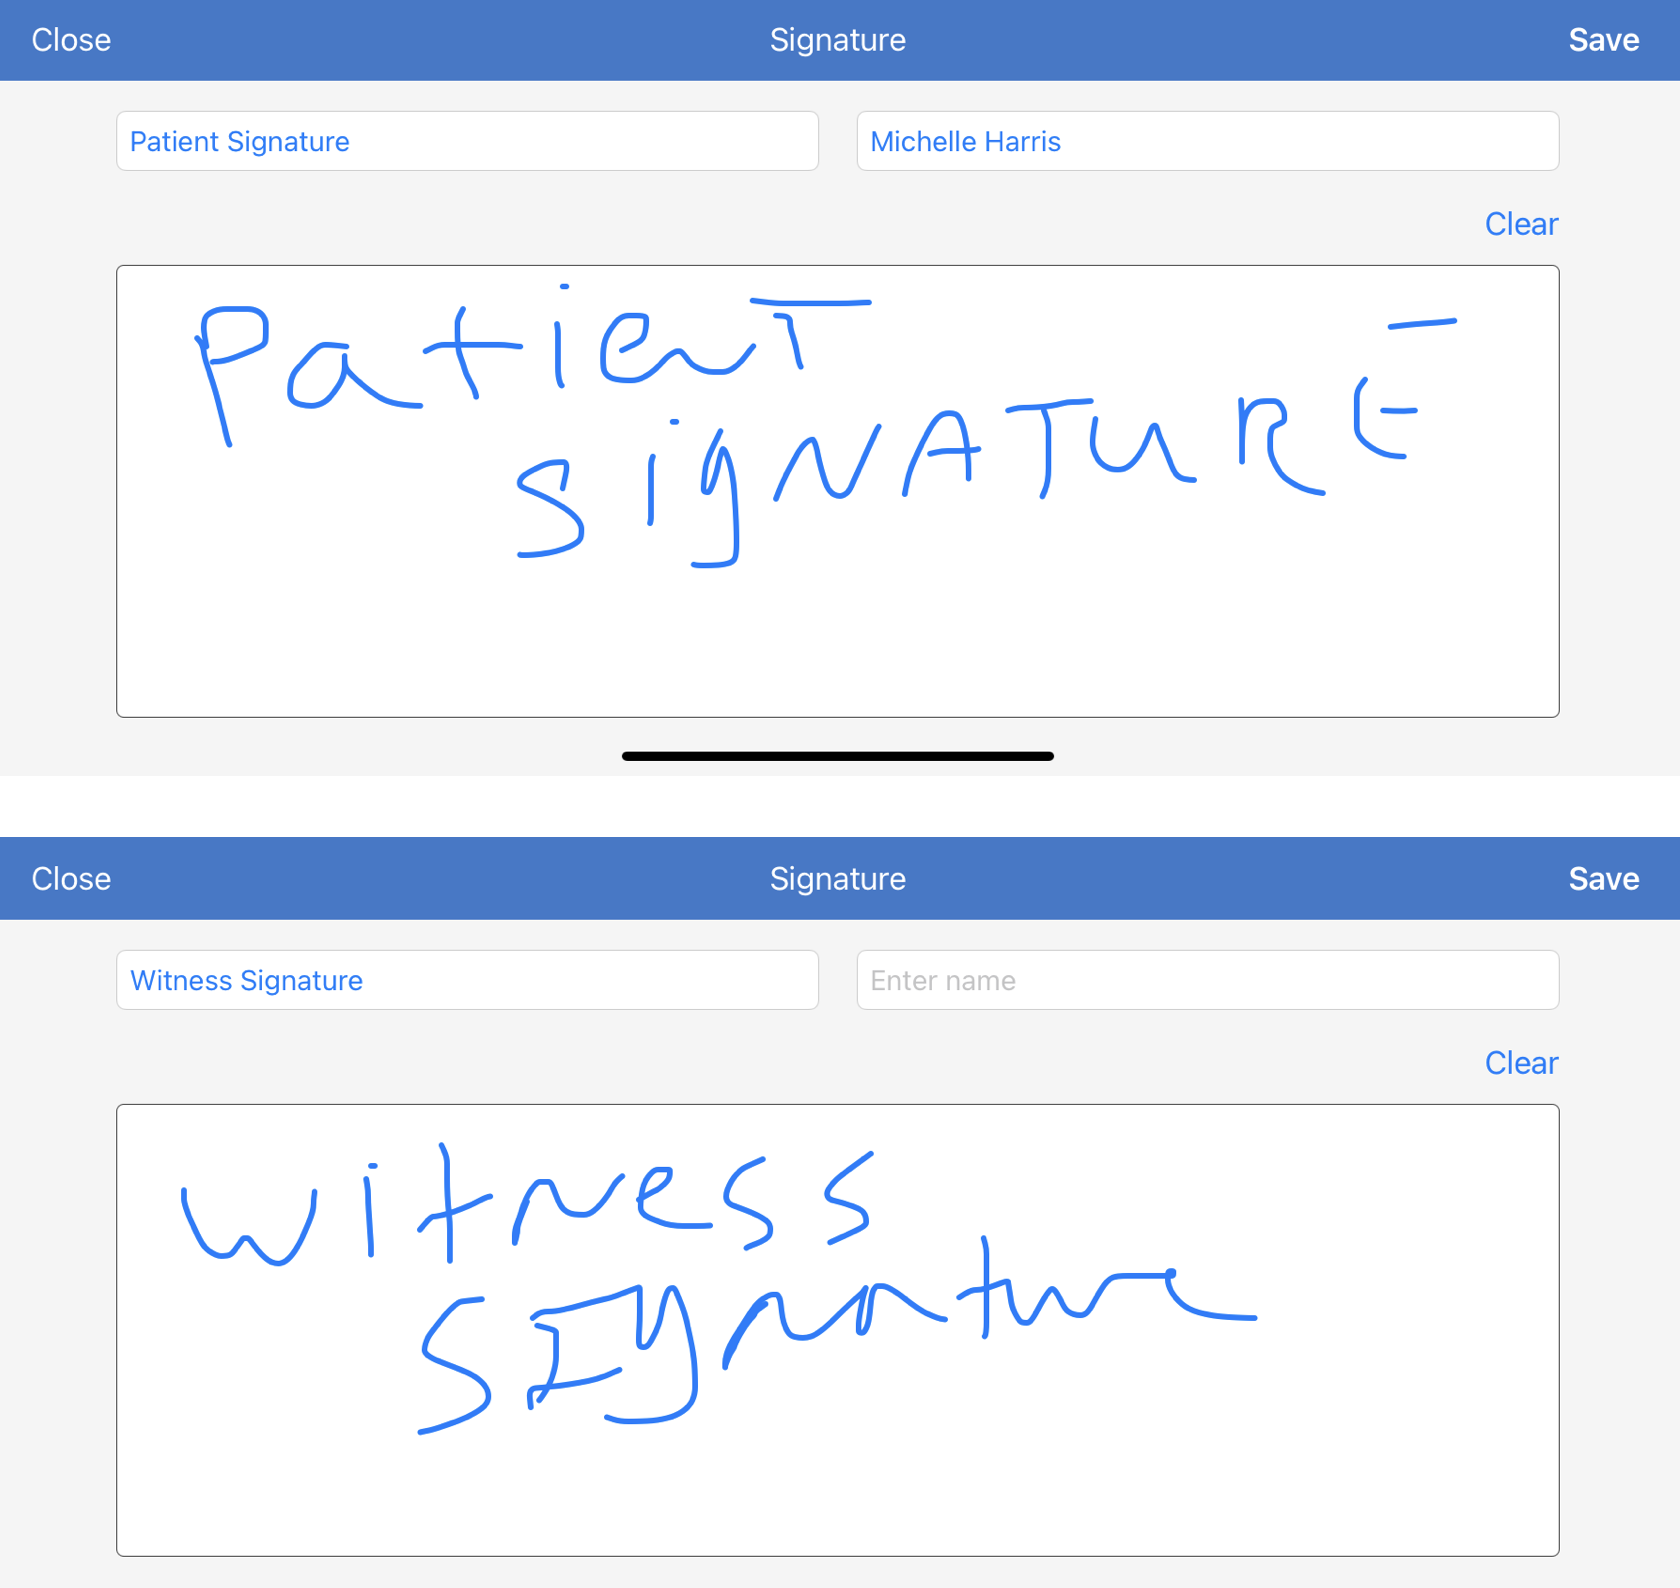 Witness_and_Patient_Signature_Side_by_Side.png